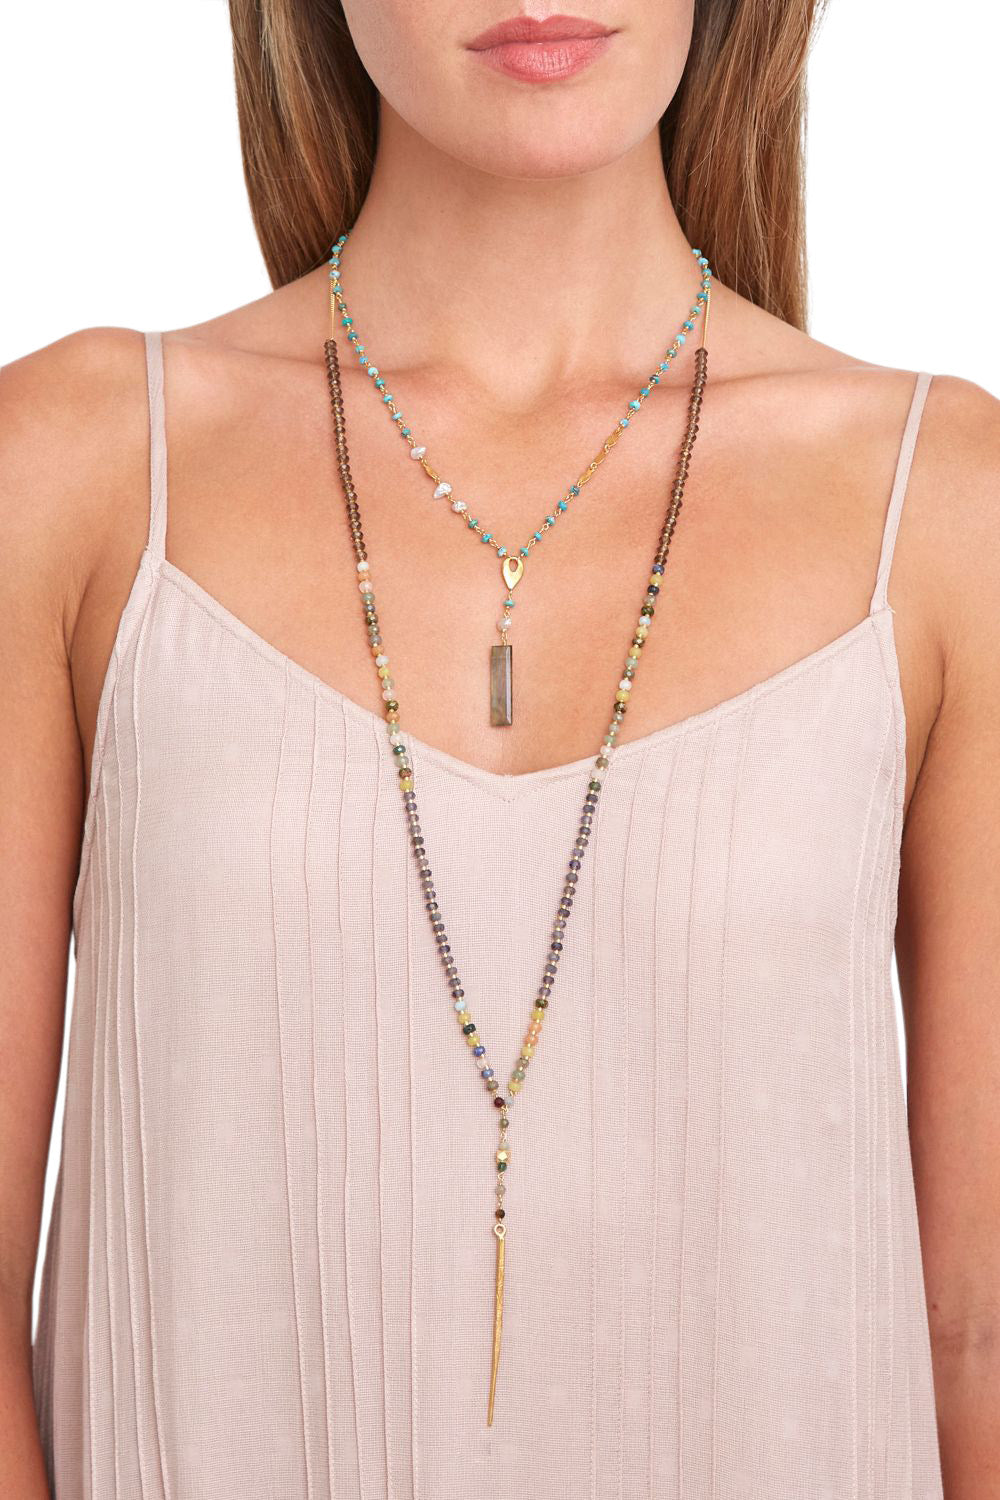 Chan Luu Beaded Dagger Necklace in Yellow Gold